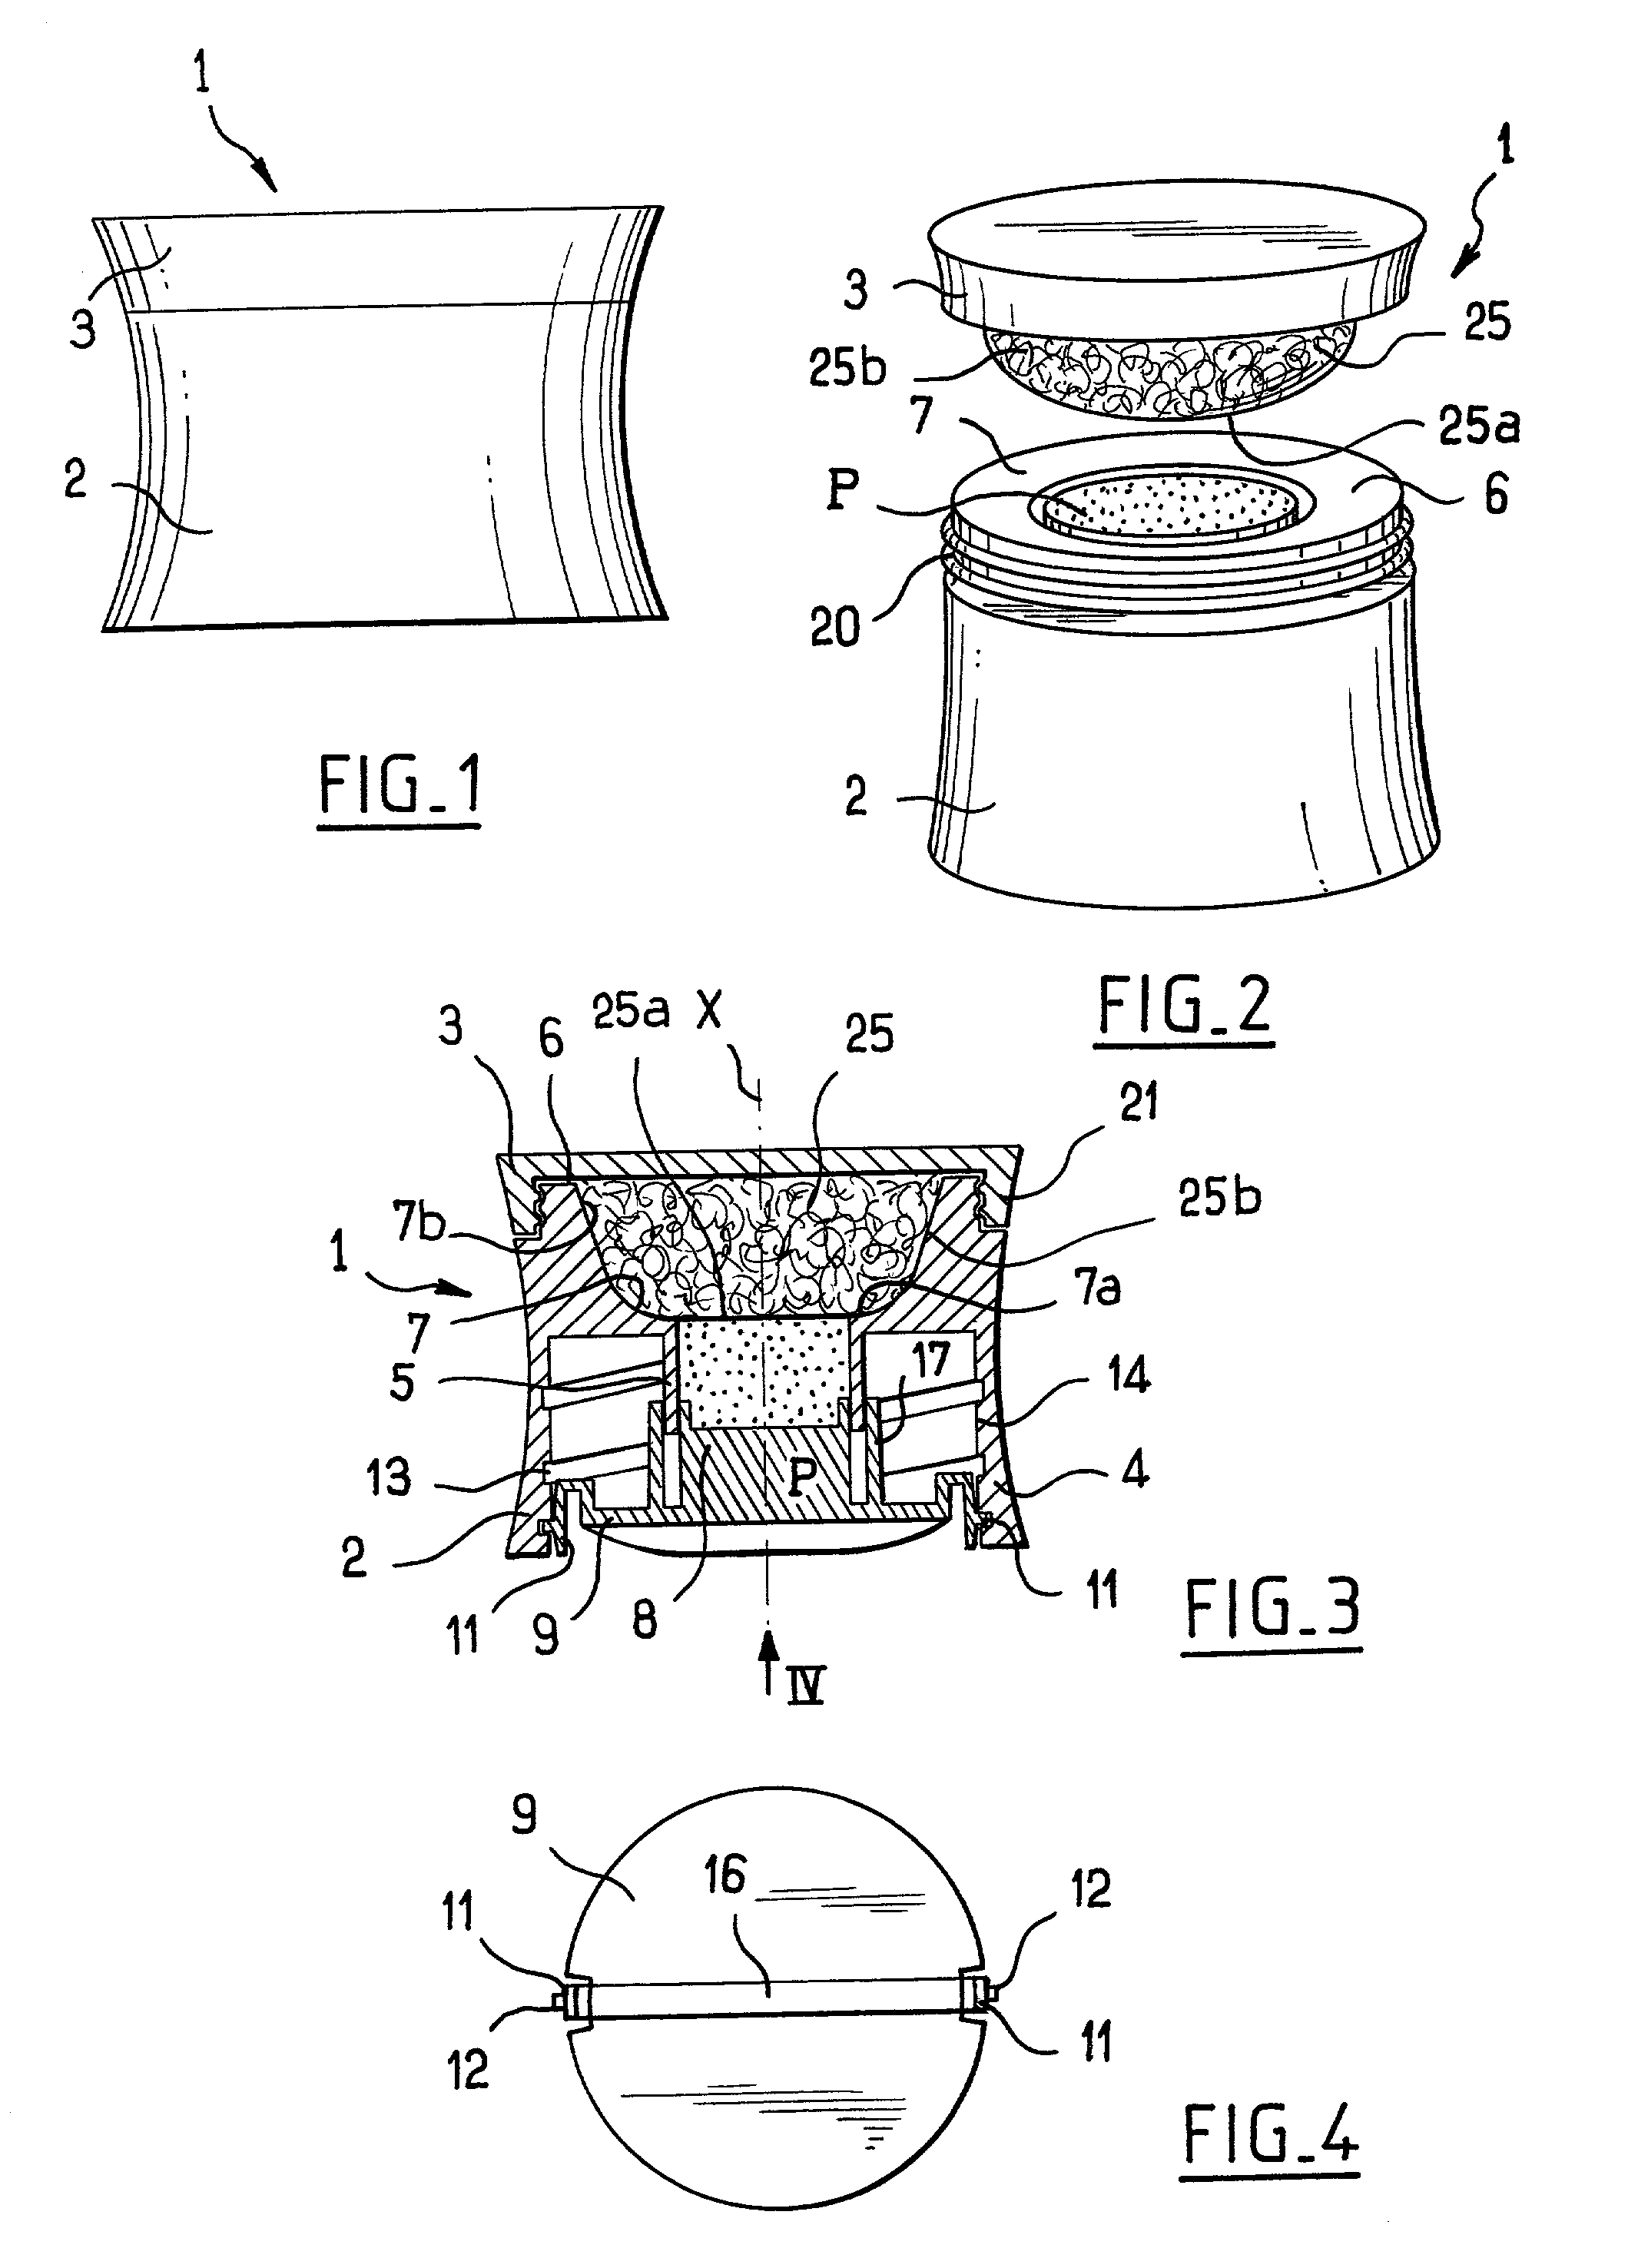 Packaging and applicator device